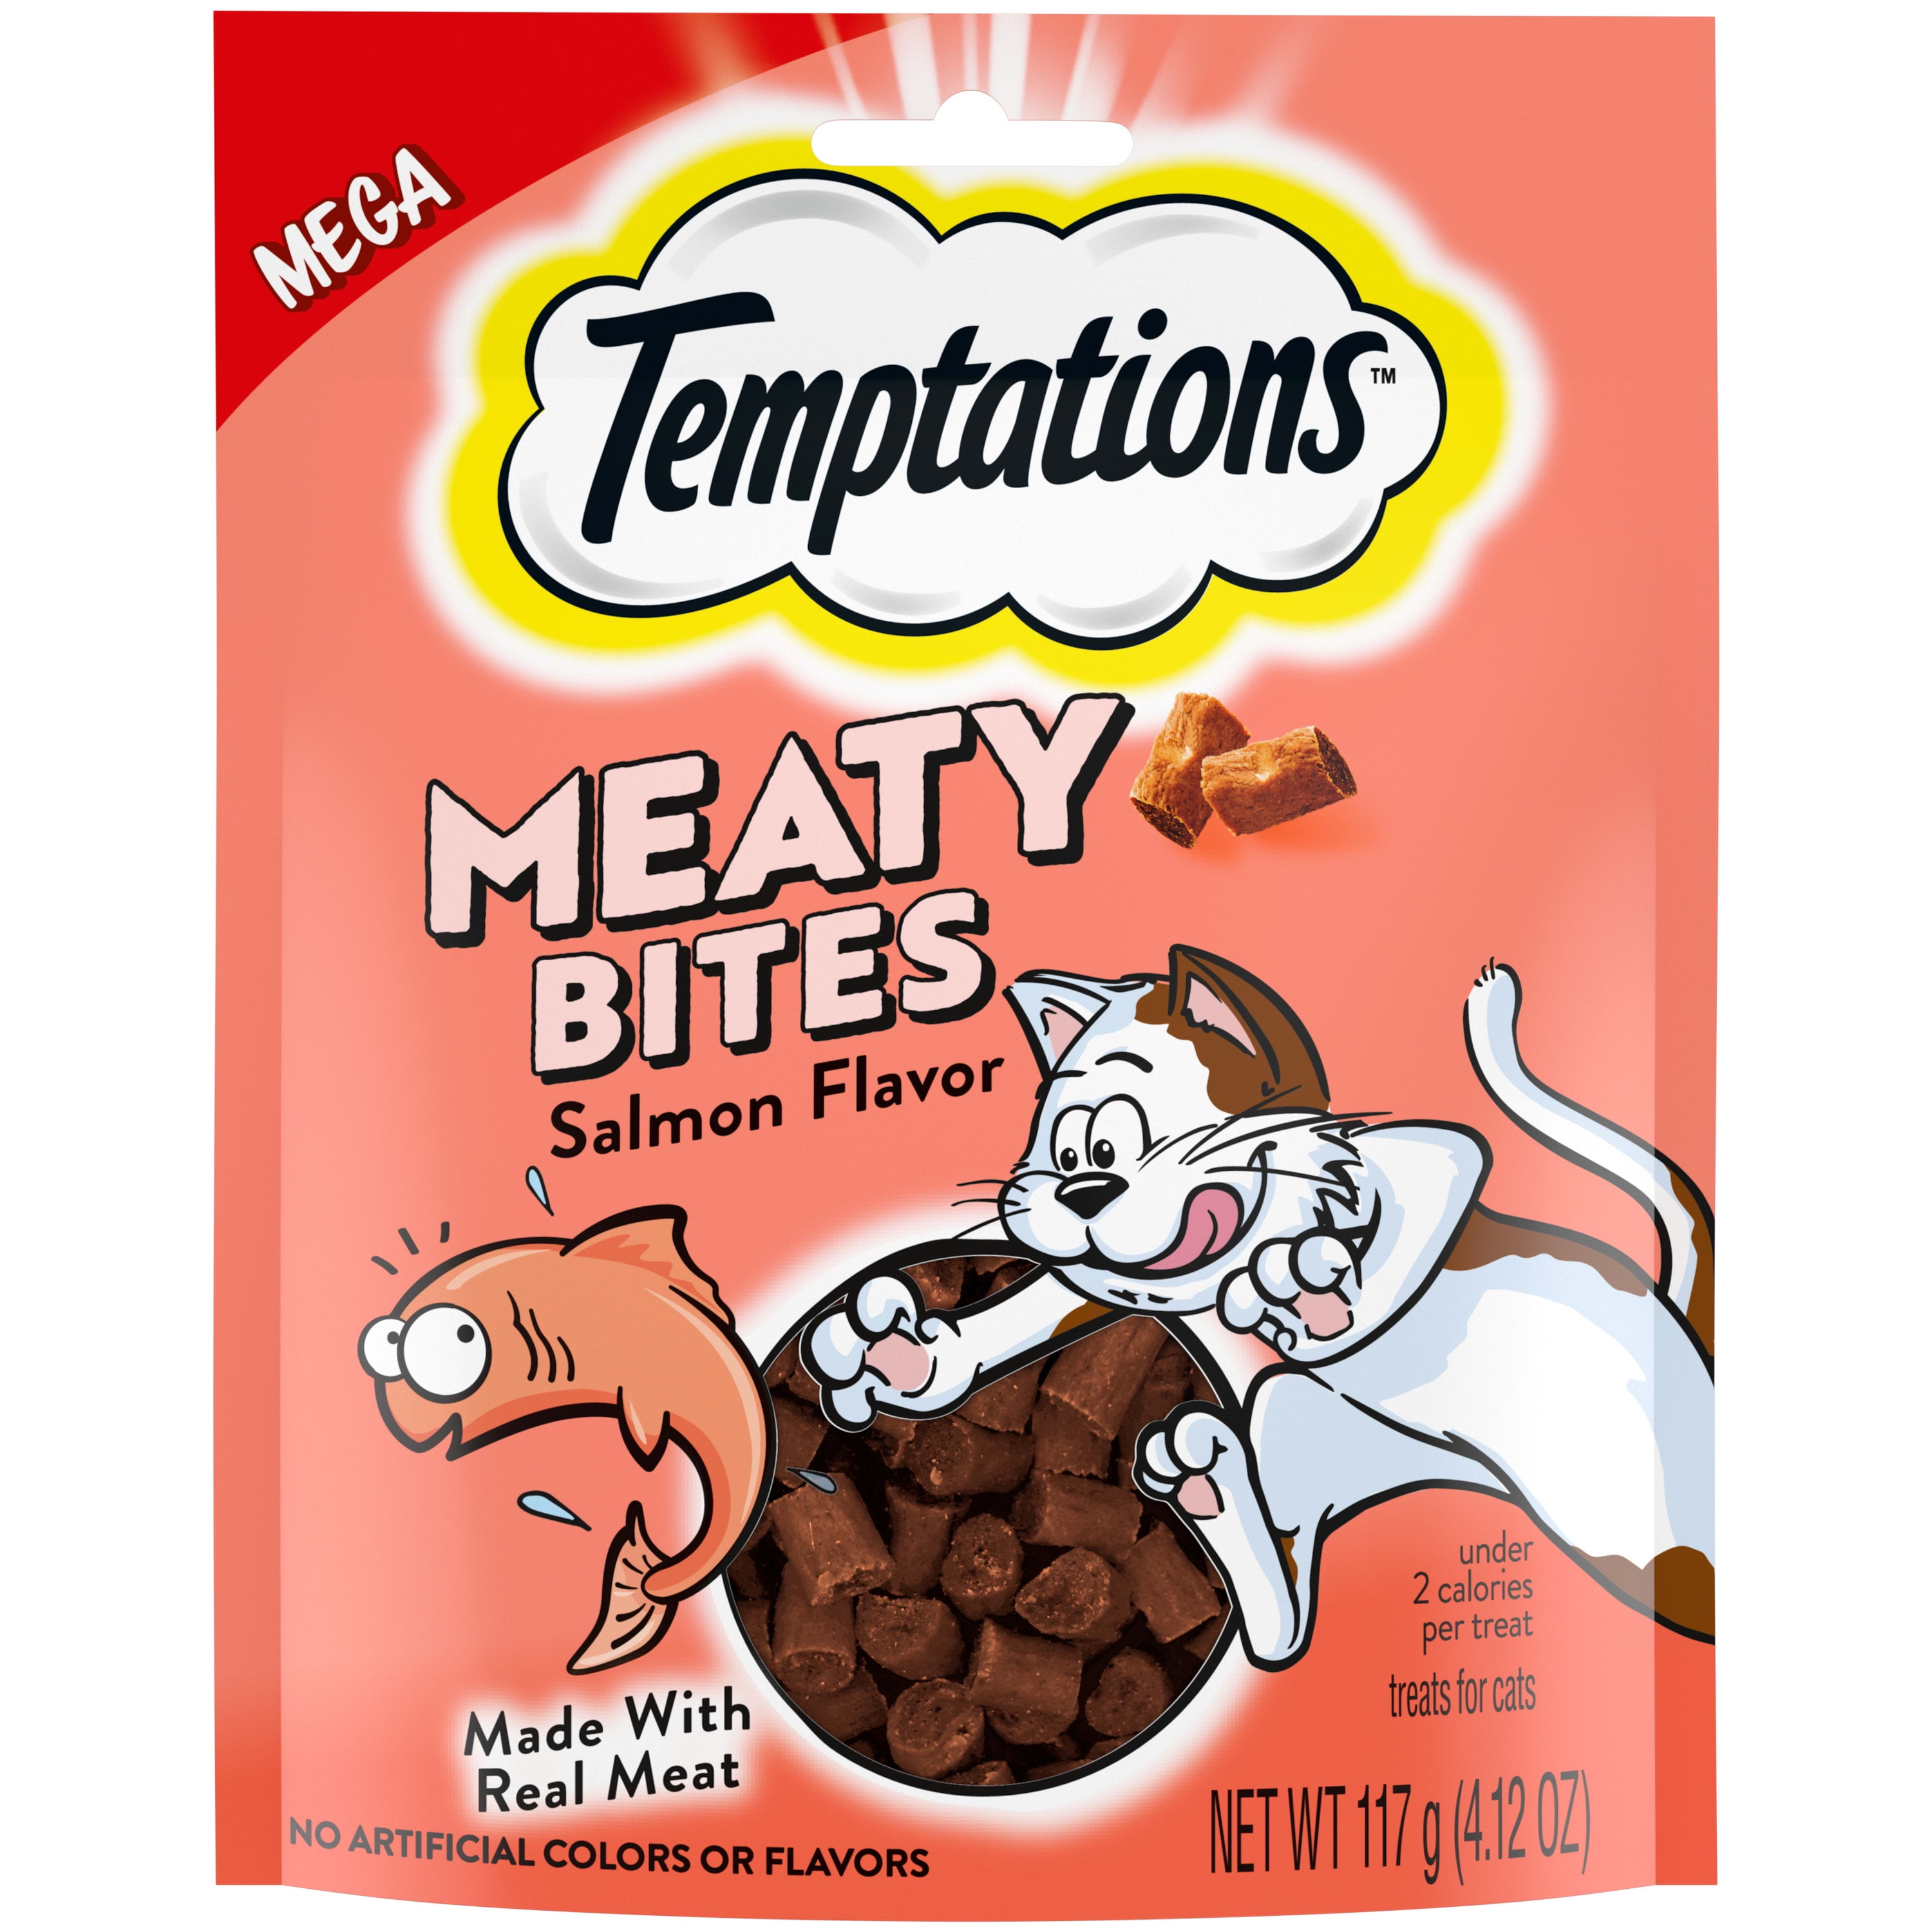 Soft and Savory Cat Treats TEMPTATIONS Meaty Bites 4.12 oz Pouch Salmon Flavor 